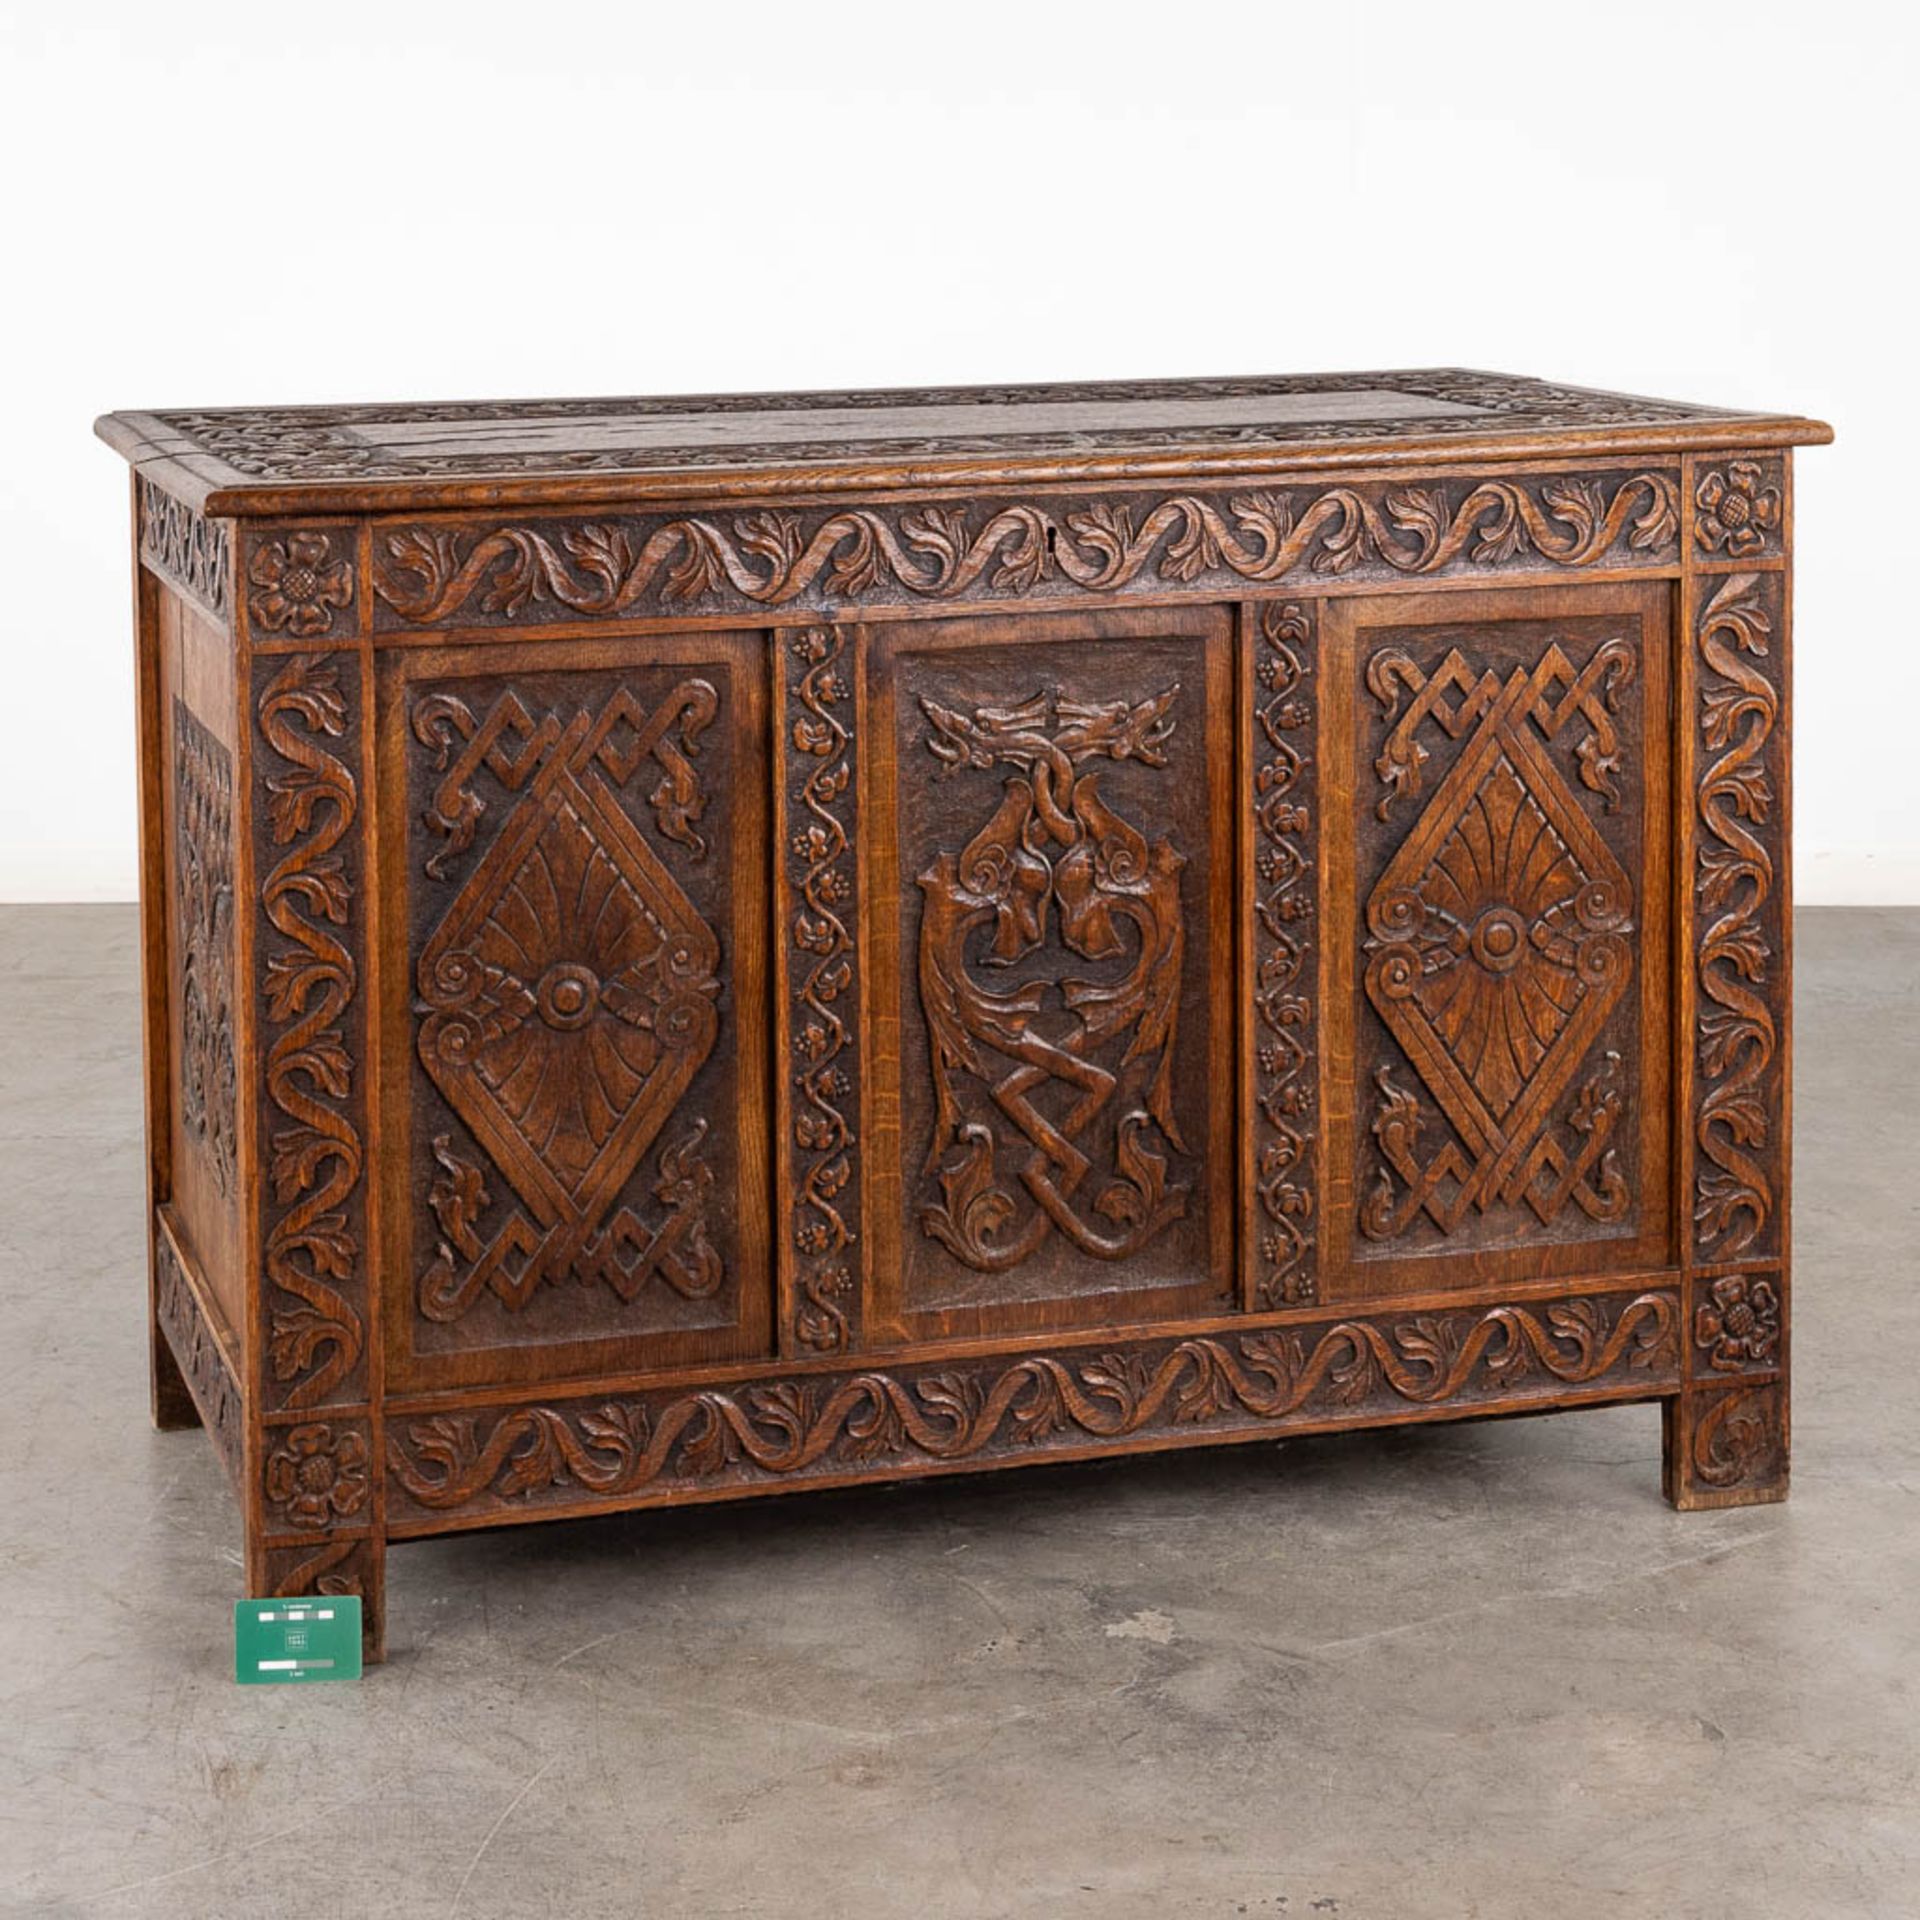 An antique and decorative chest with wood-sculptures. (D:56 x W:122 x H:82 cm) - Image 2 of 15